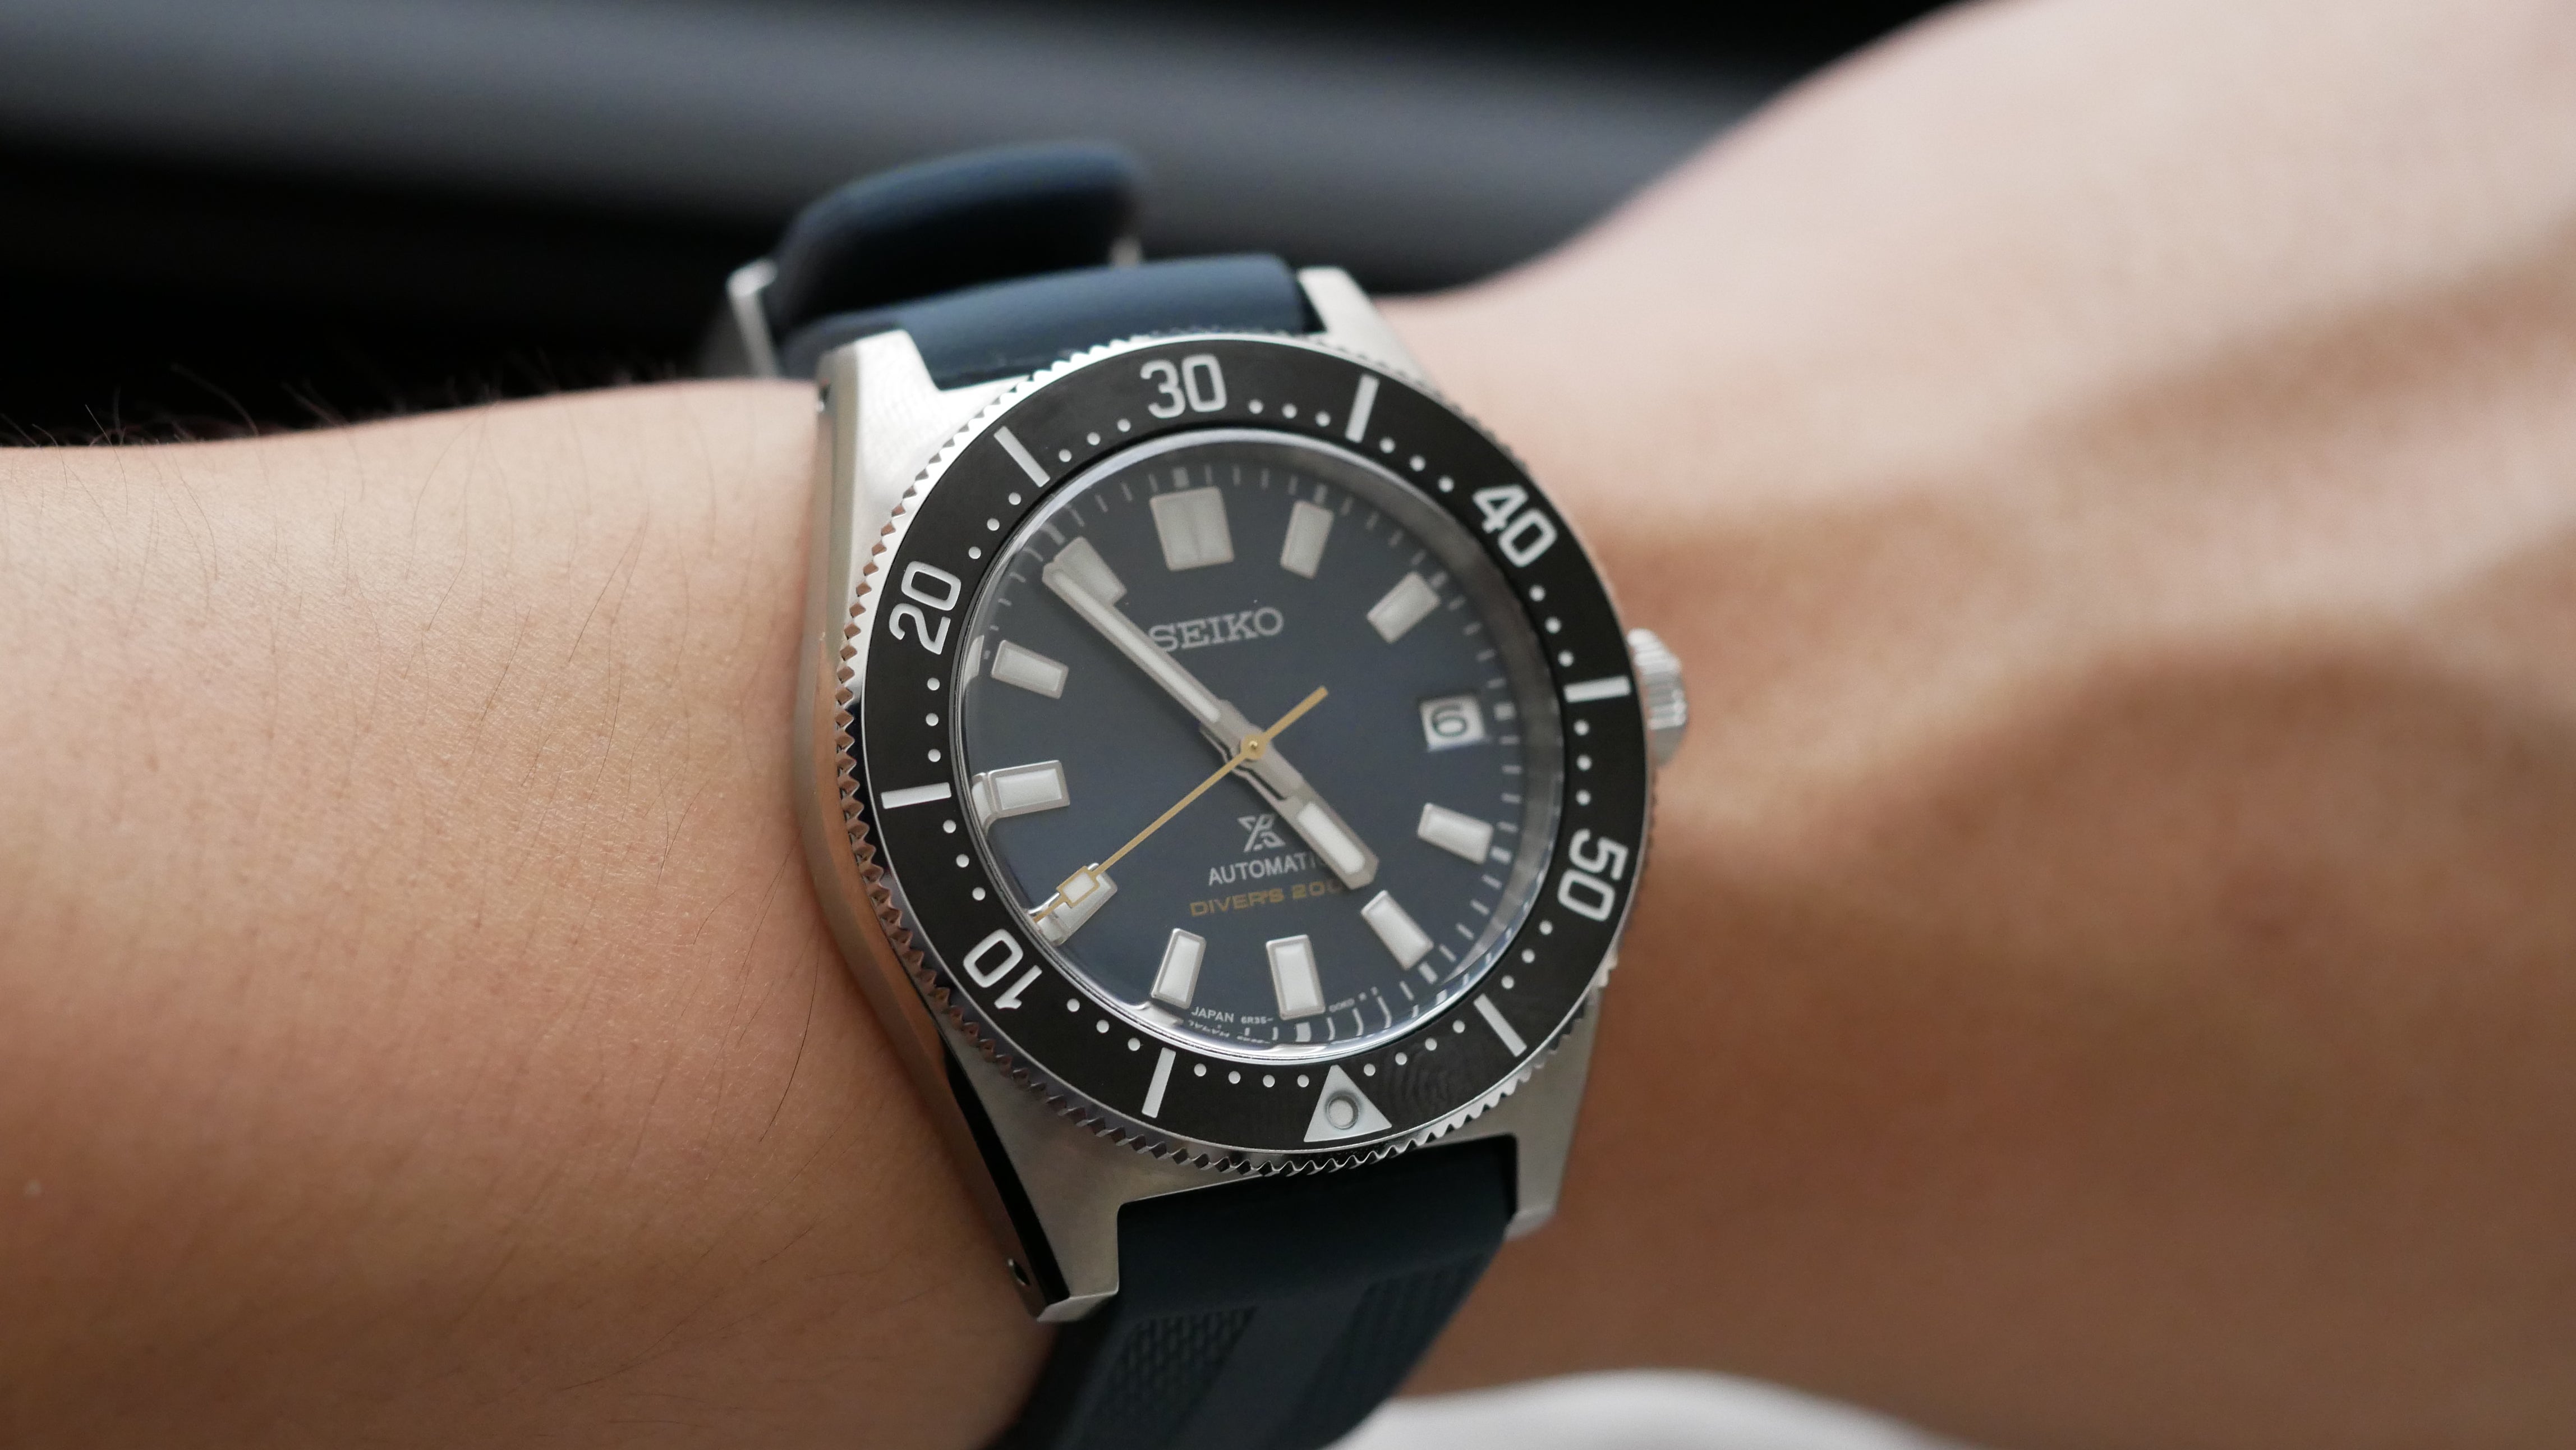 Seiko won. First impressions of the SPB149/SBDC107 with SD4k